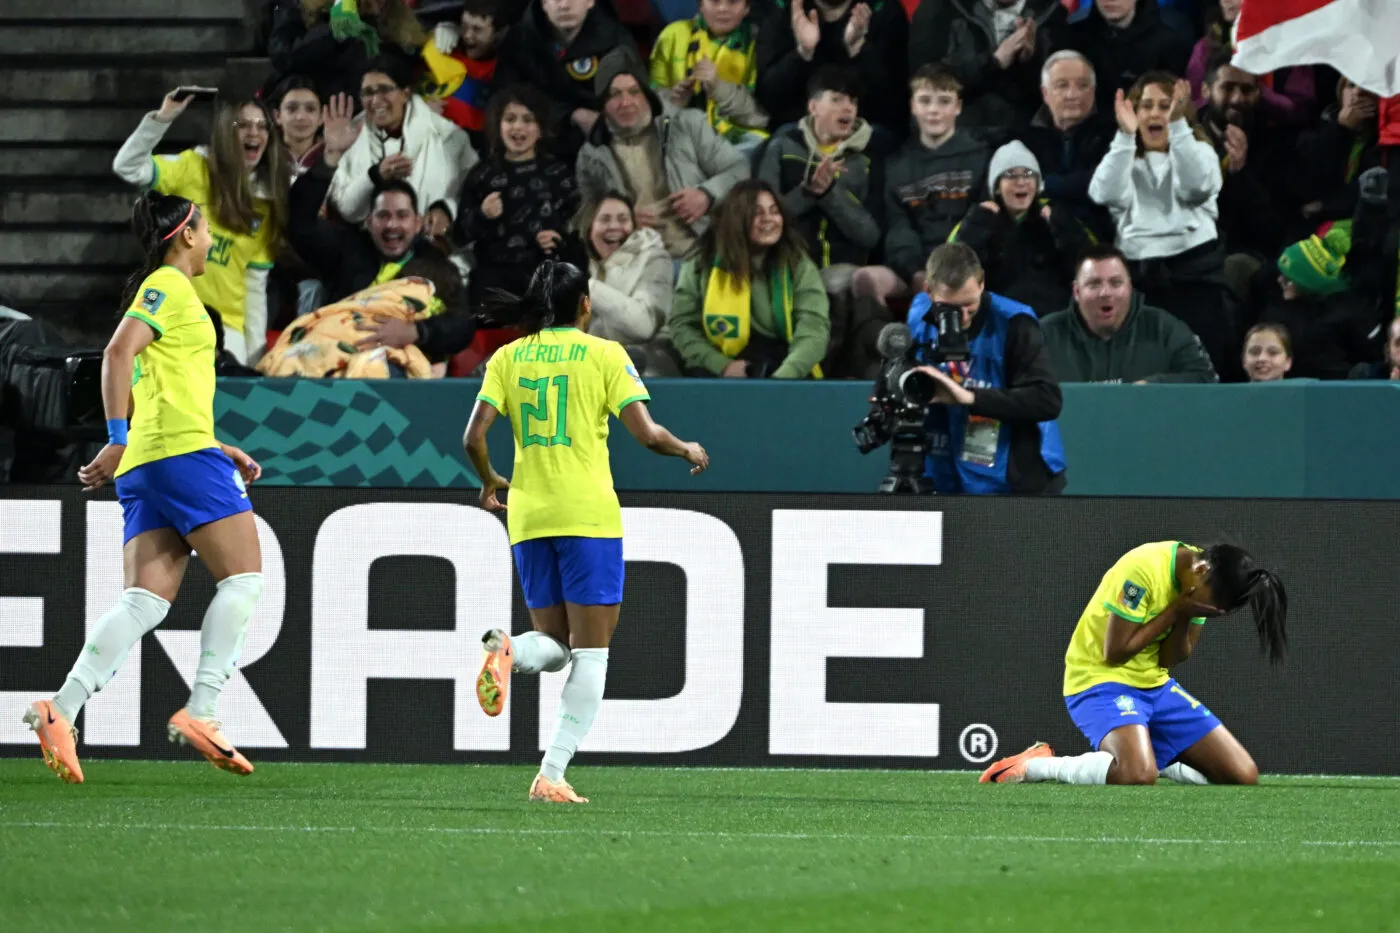 (230724) -- ADELAIDE, July 24, 2023 (Xinhua) -- Brazil's Ary Borges (R) celebrates scoring during the Group F match between Brazil and Panama at the 2023 FIFA Women's World Cup in Adelaide, Australia, July 24, 2023. (Xinhua/Xiong Qi) - Photo by Icon sport